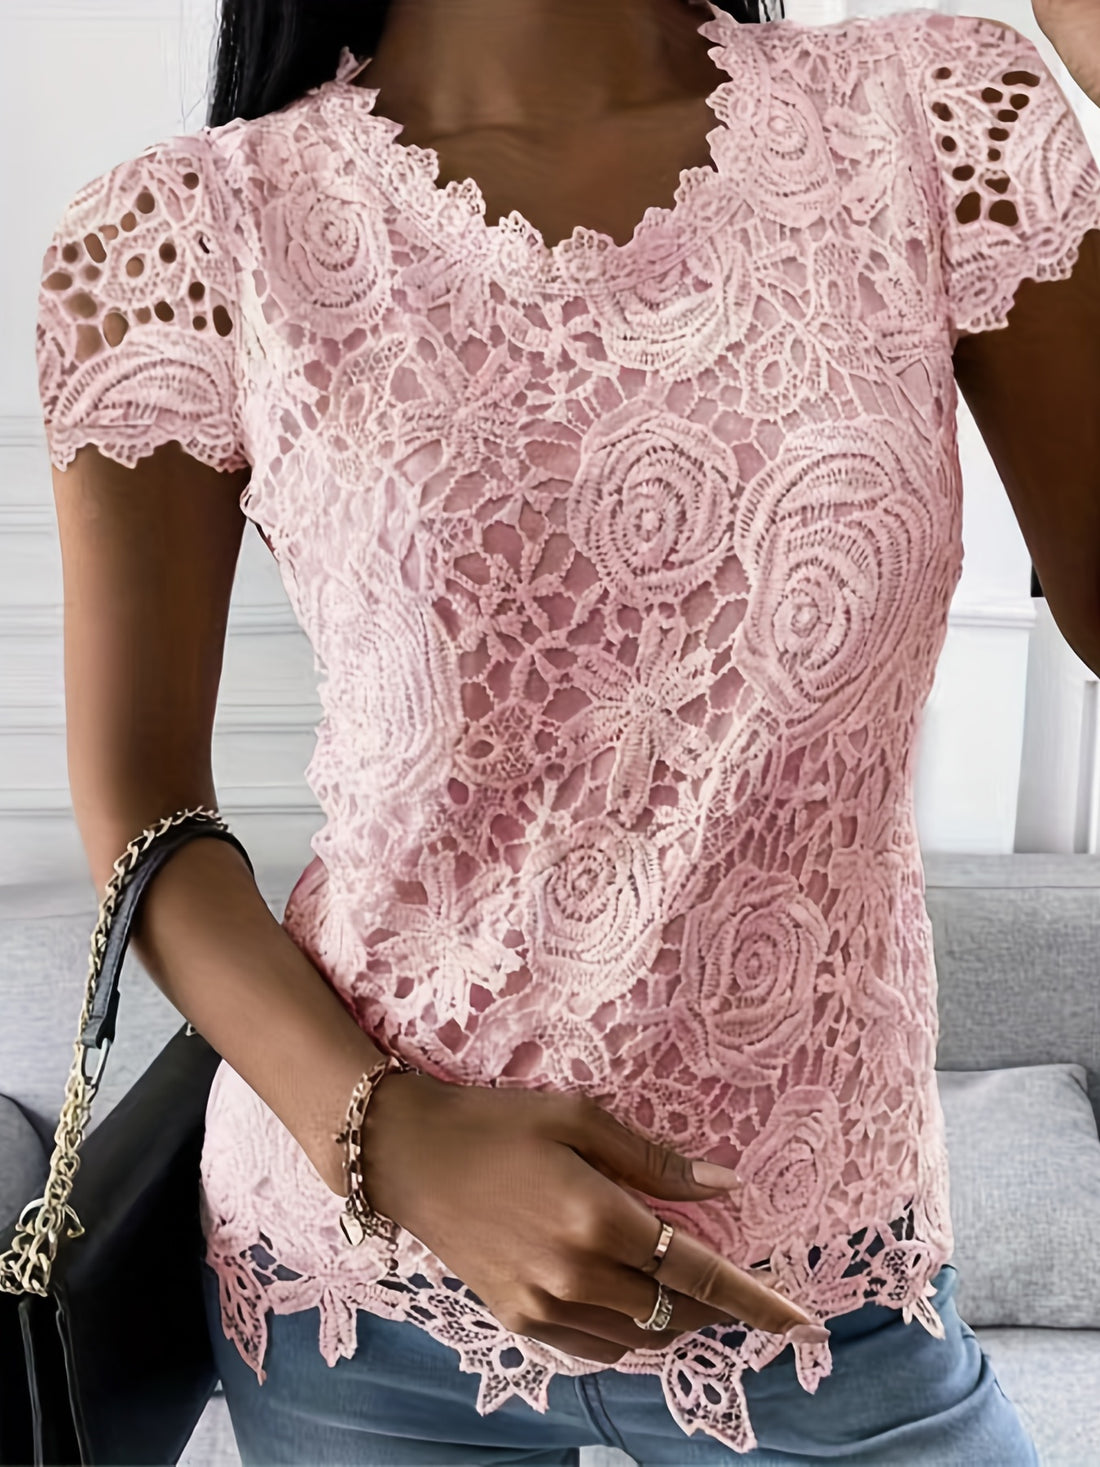 Women's Elegant Lace Crew Neck Short Sleeve T-Shirt - Stylish and Comfortable Top for Any Occasion